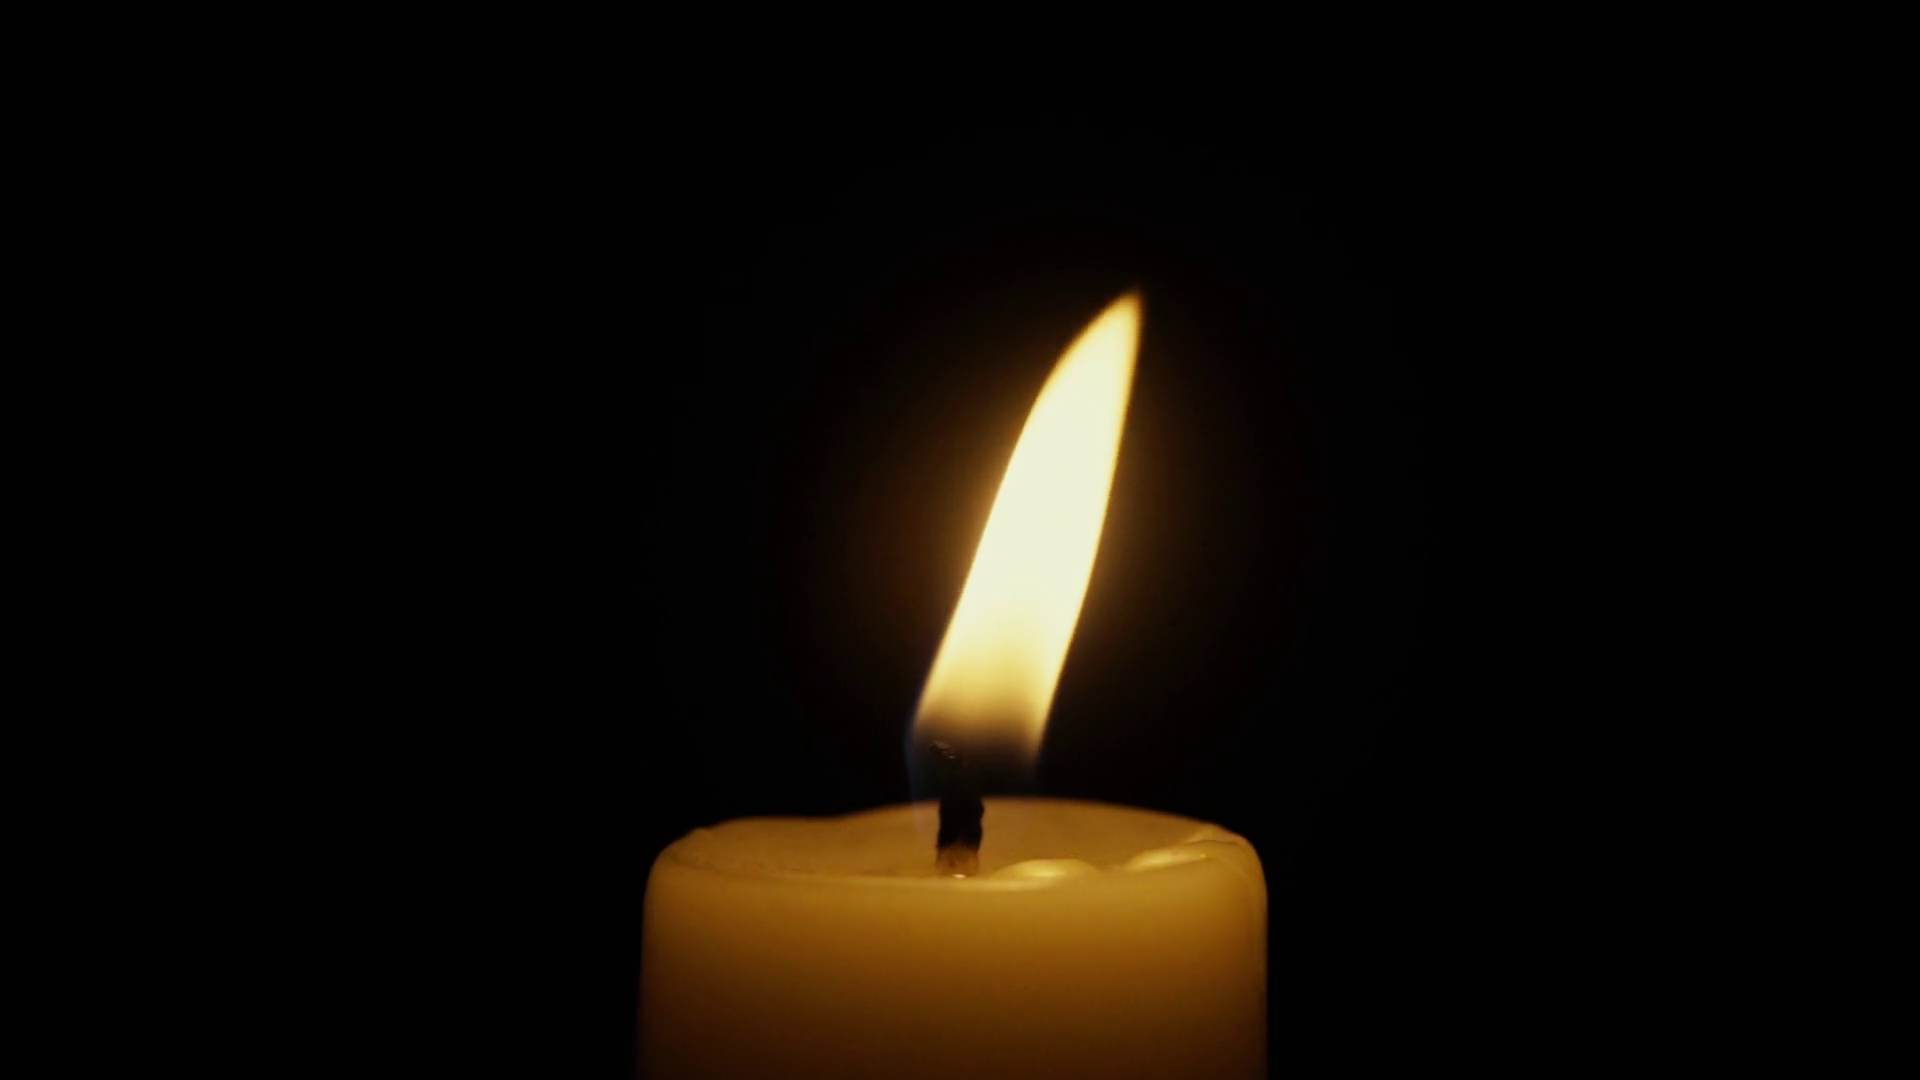 Candle flame gently swaying in the wind on a black background near ...